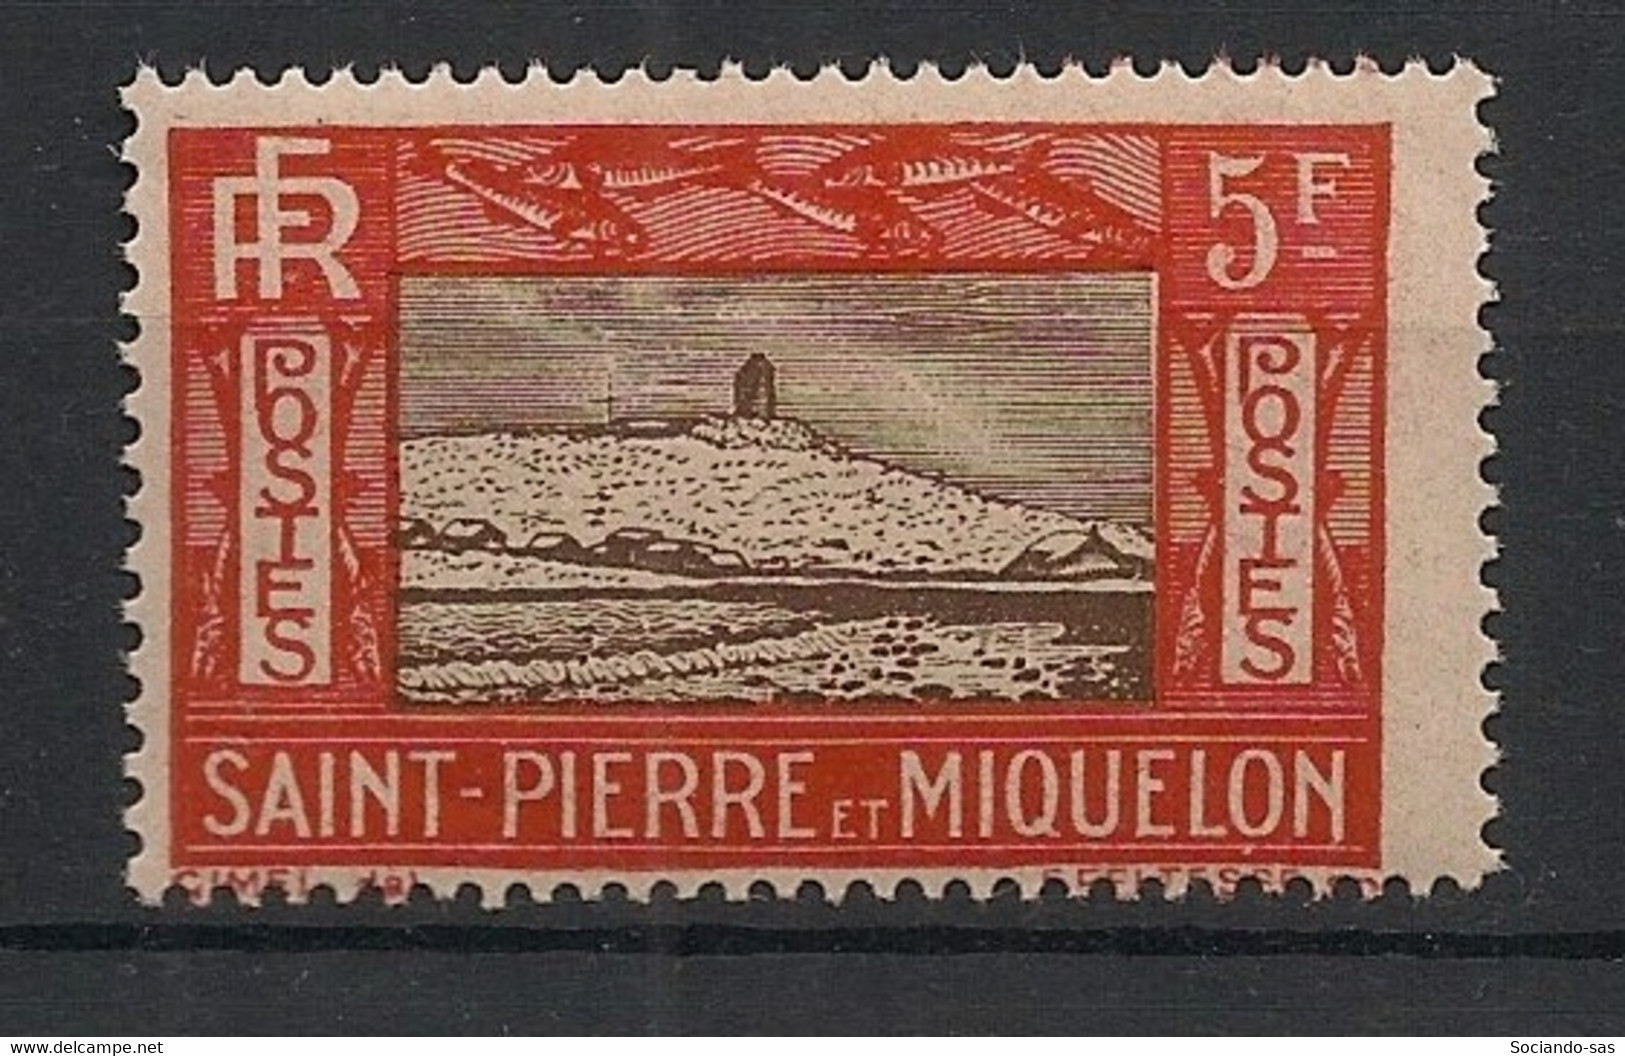 SPM - 1932-33 - N°YT. 157 - Phare 5f Rouge Et Brun - Neuf Luxe ** / MNH / Postfrisch - Unused Stamps